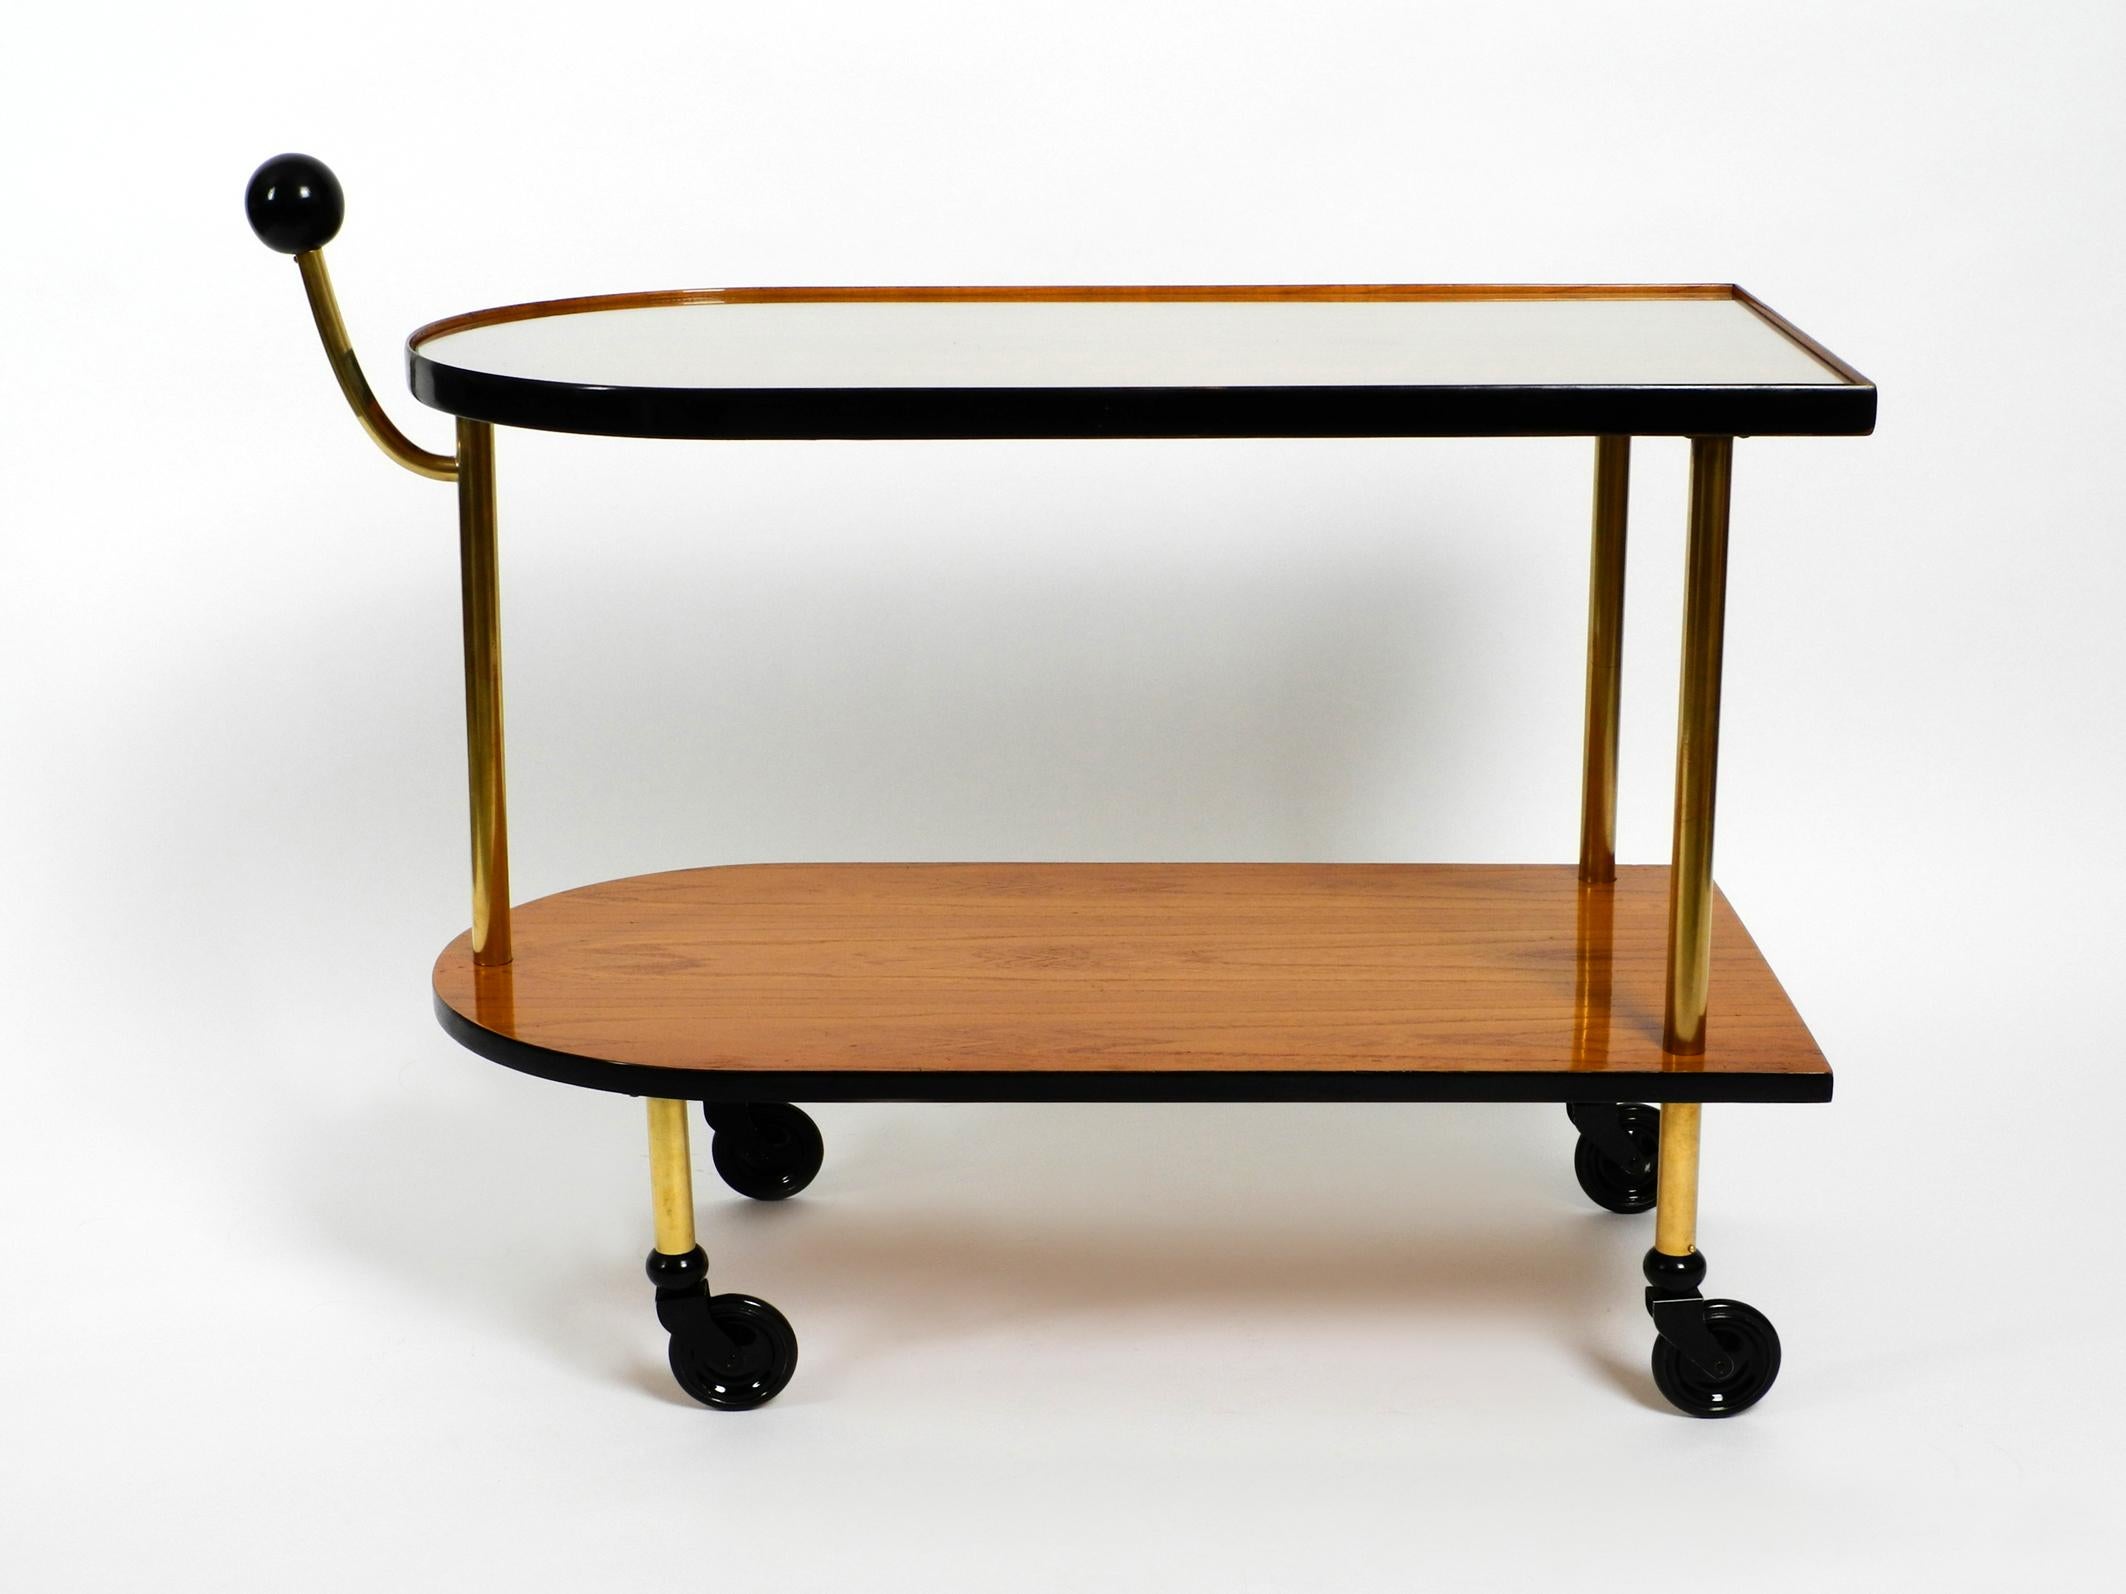 Very rare and beautiful French 1930s Art Deco serving trolley. 
With a glass plate on the upper shelf. Completely refurbished. 
The wooden panels are veneered with ash.
The surfaces were polished with ruby shellac, the top edges with black piano